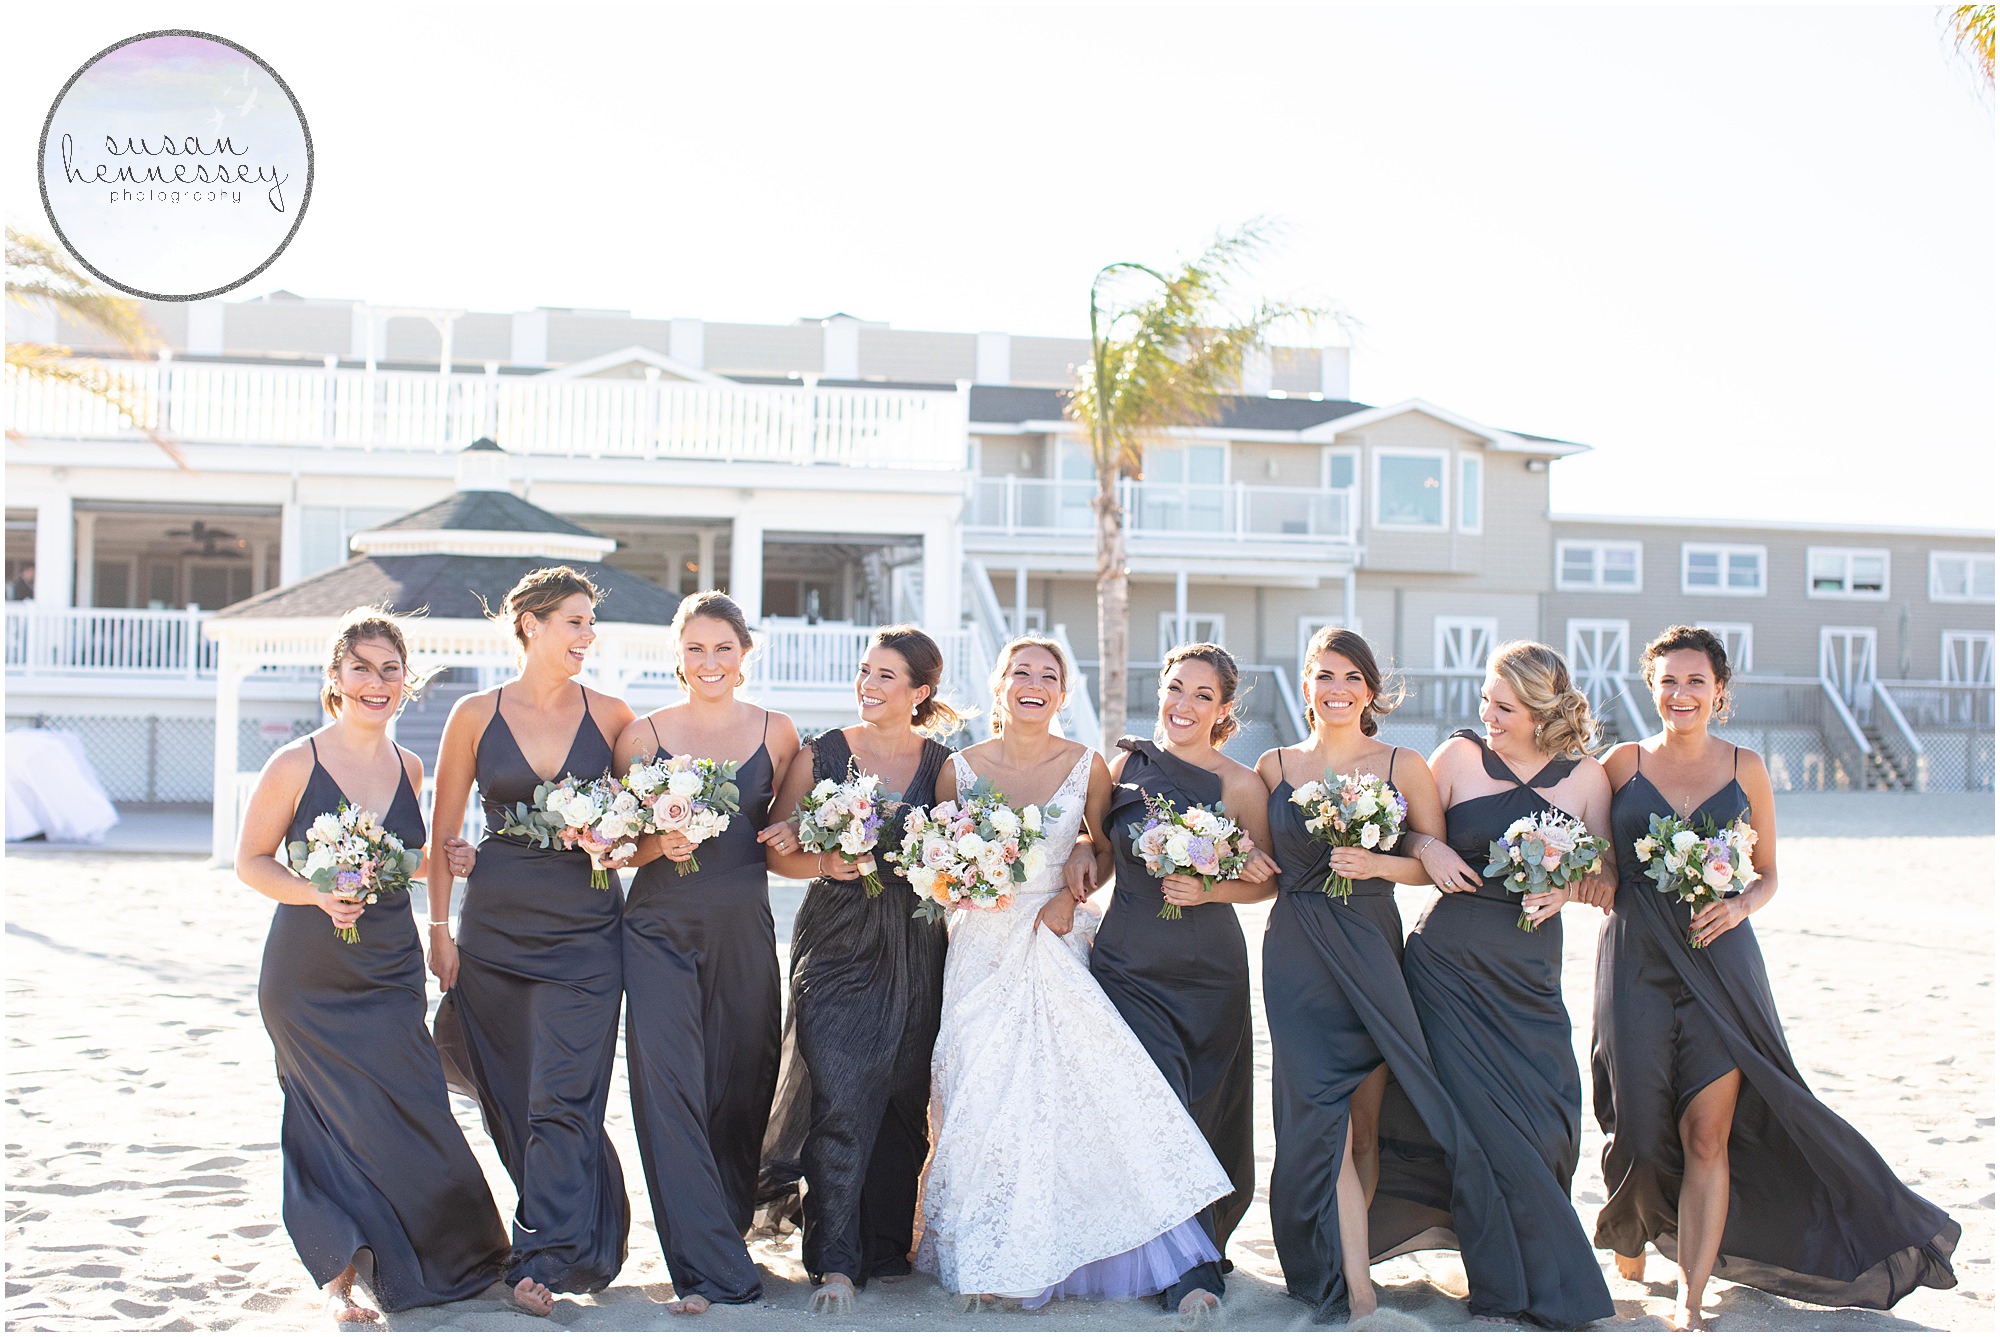 Bride and bridesmaids laugh on the beach